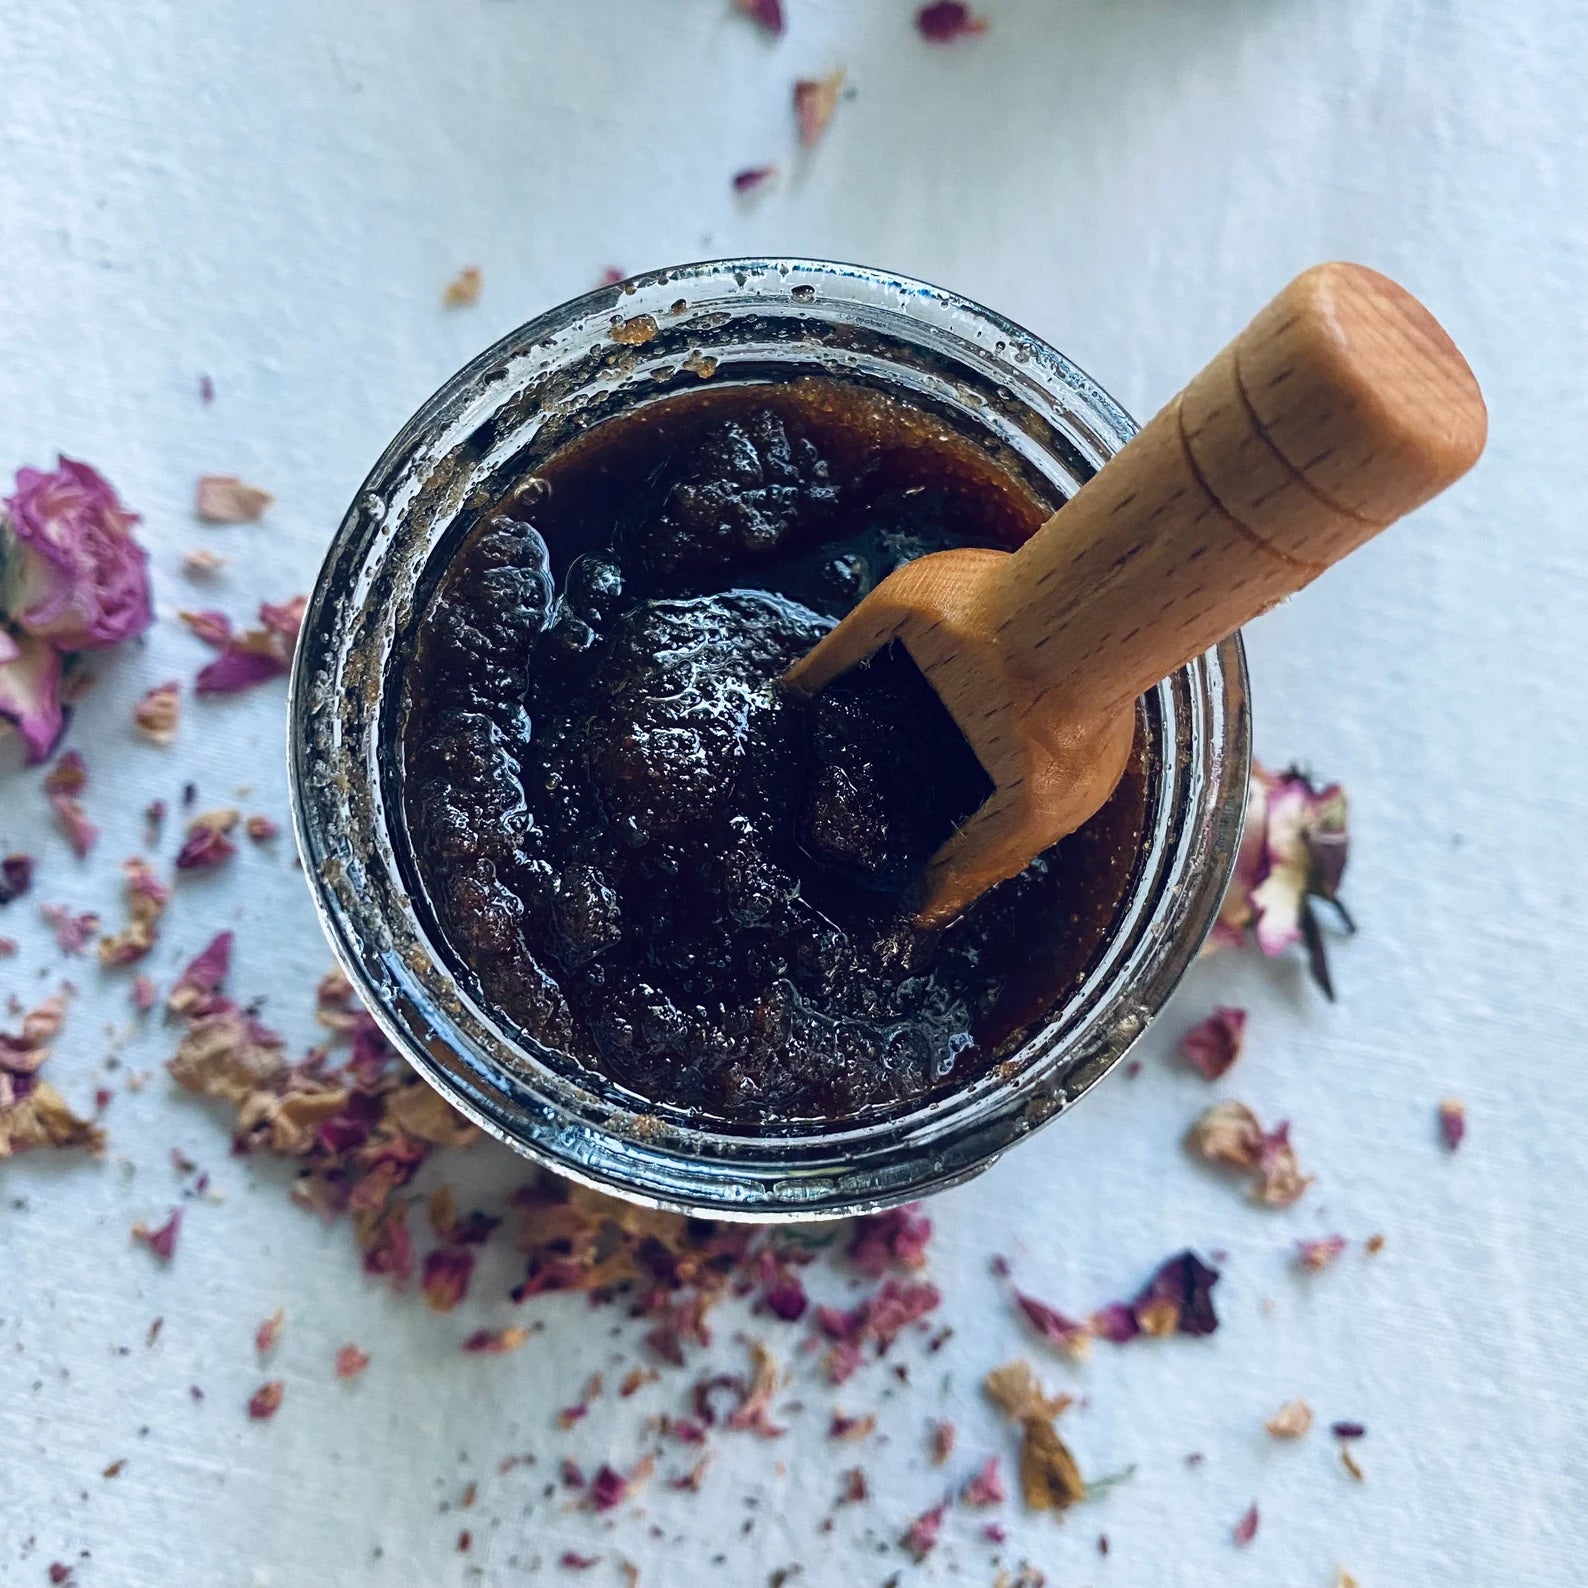 BOWM SUGAR BODY SCRUB NATURAL INGREDIENTS ROSE AND MOROCCAN CLAY IN GLASS JAR WITH WODDEN SPOON